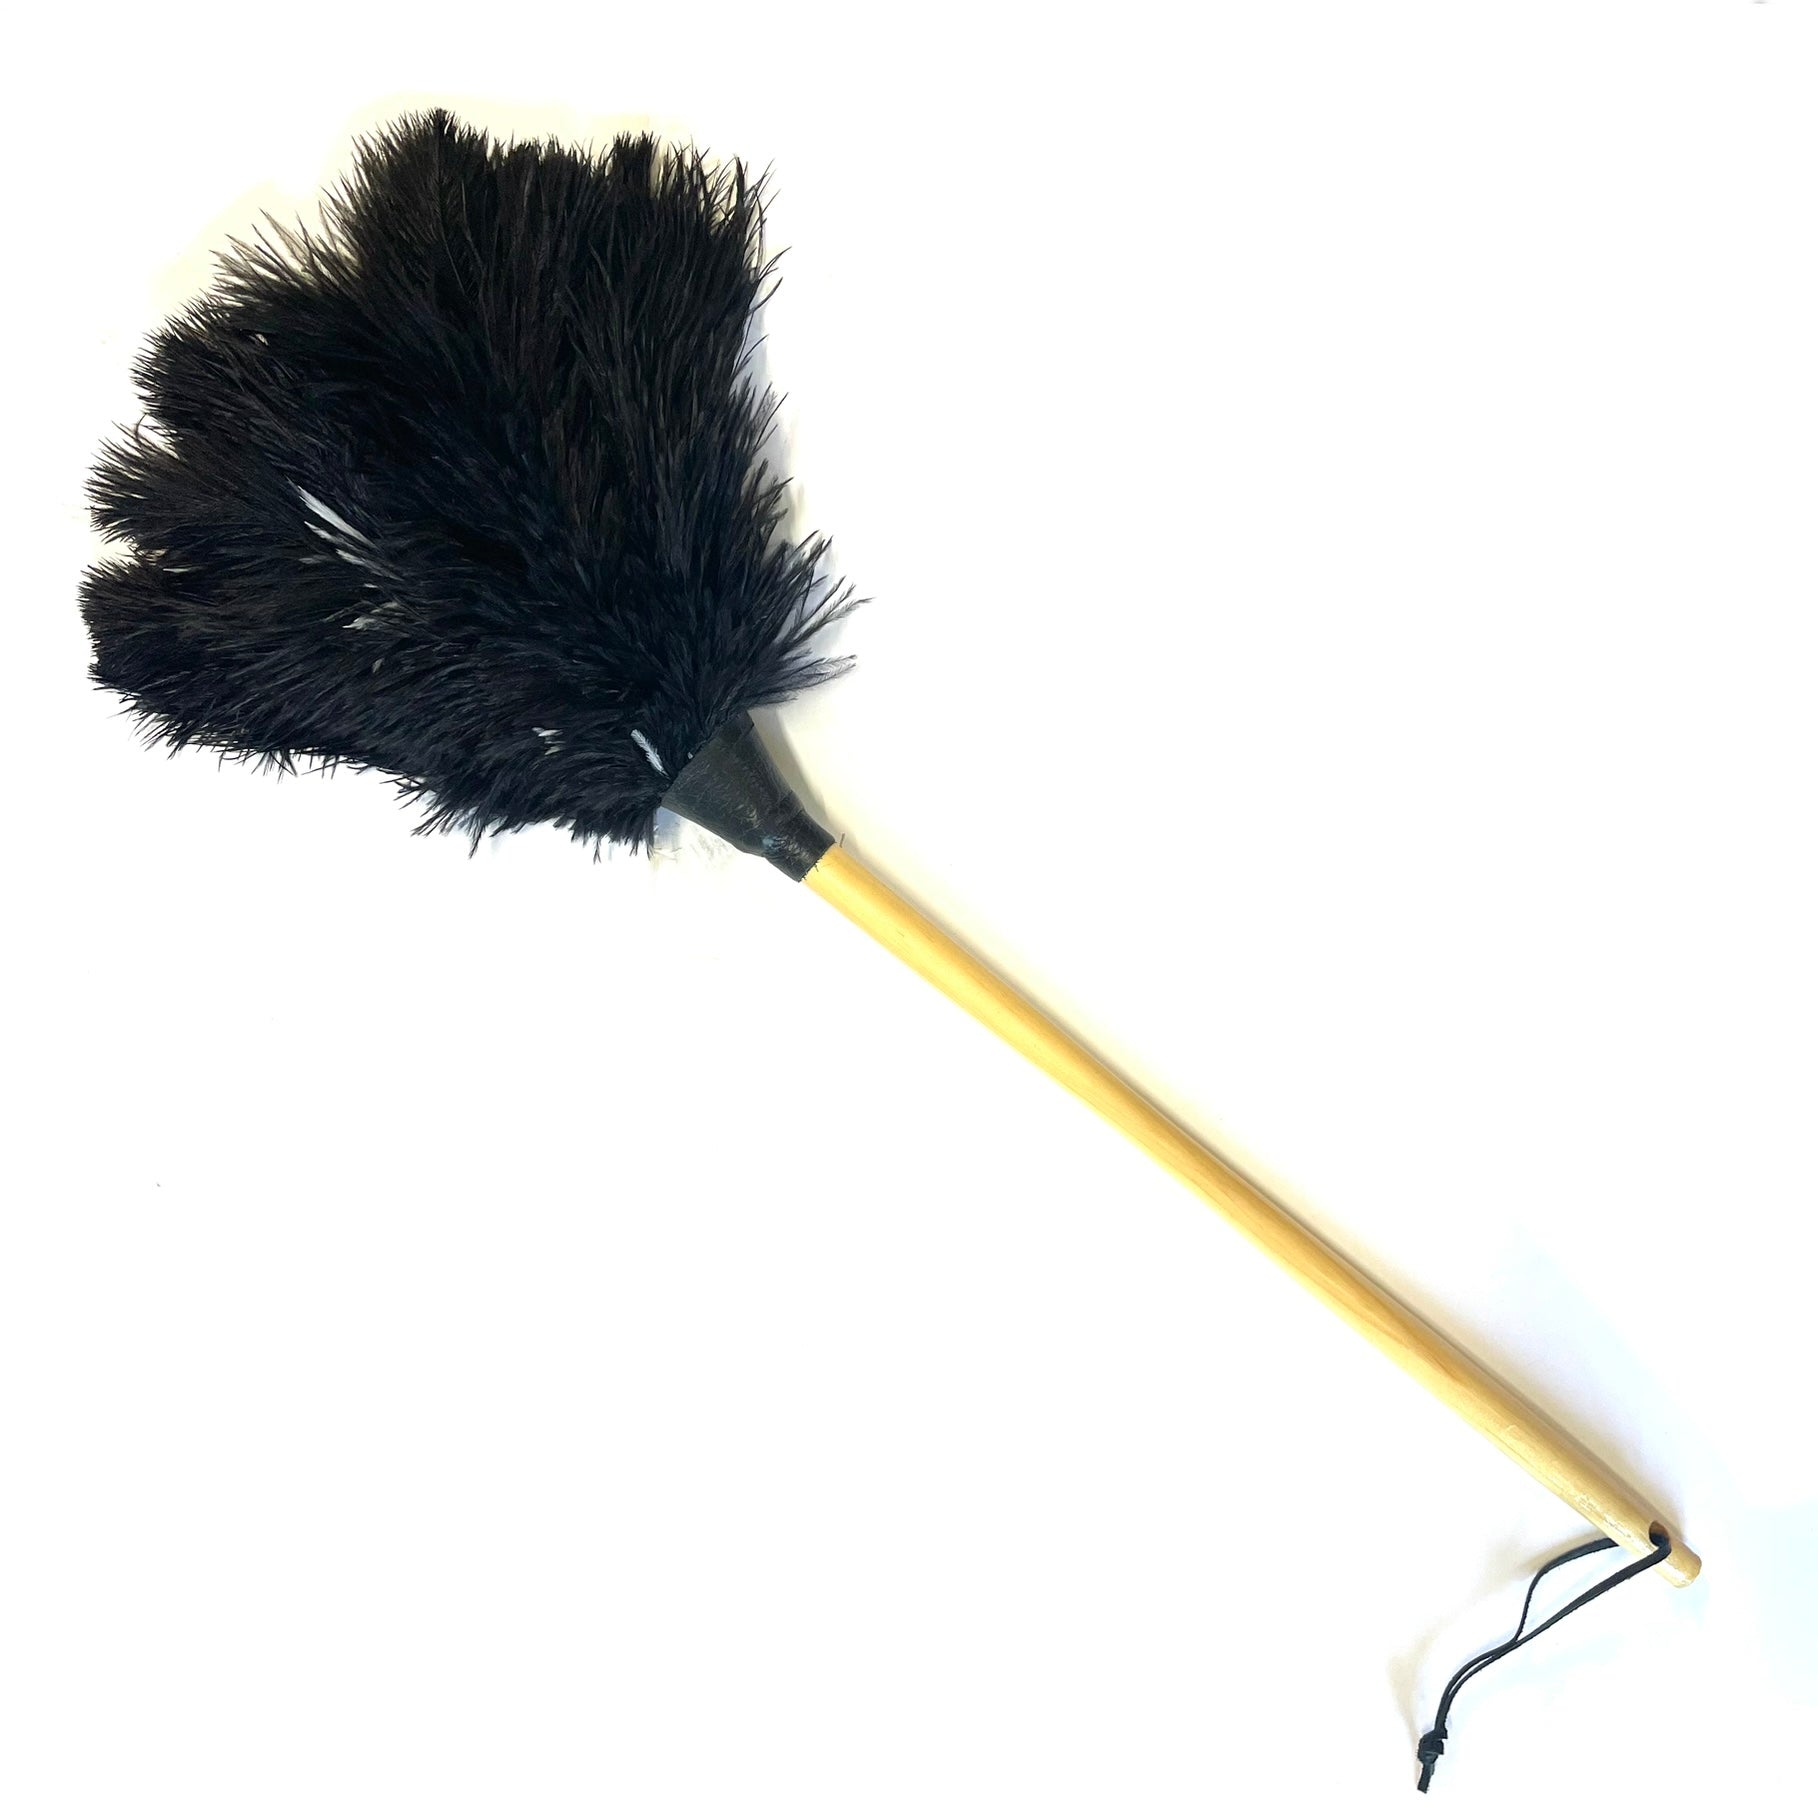 Ostrich Feather Wooden Cleaning Duster 60cm - Black & White